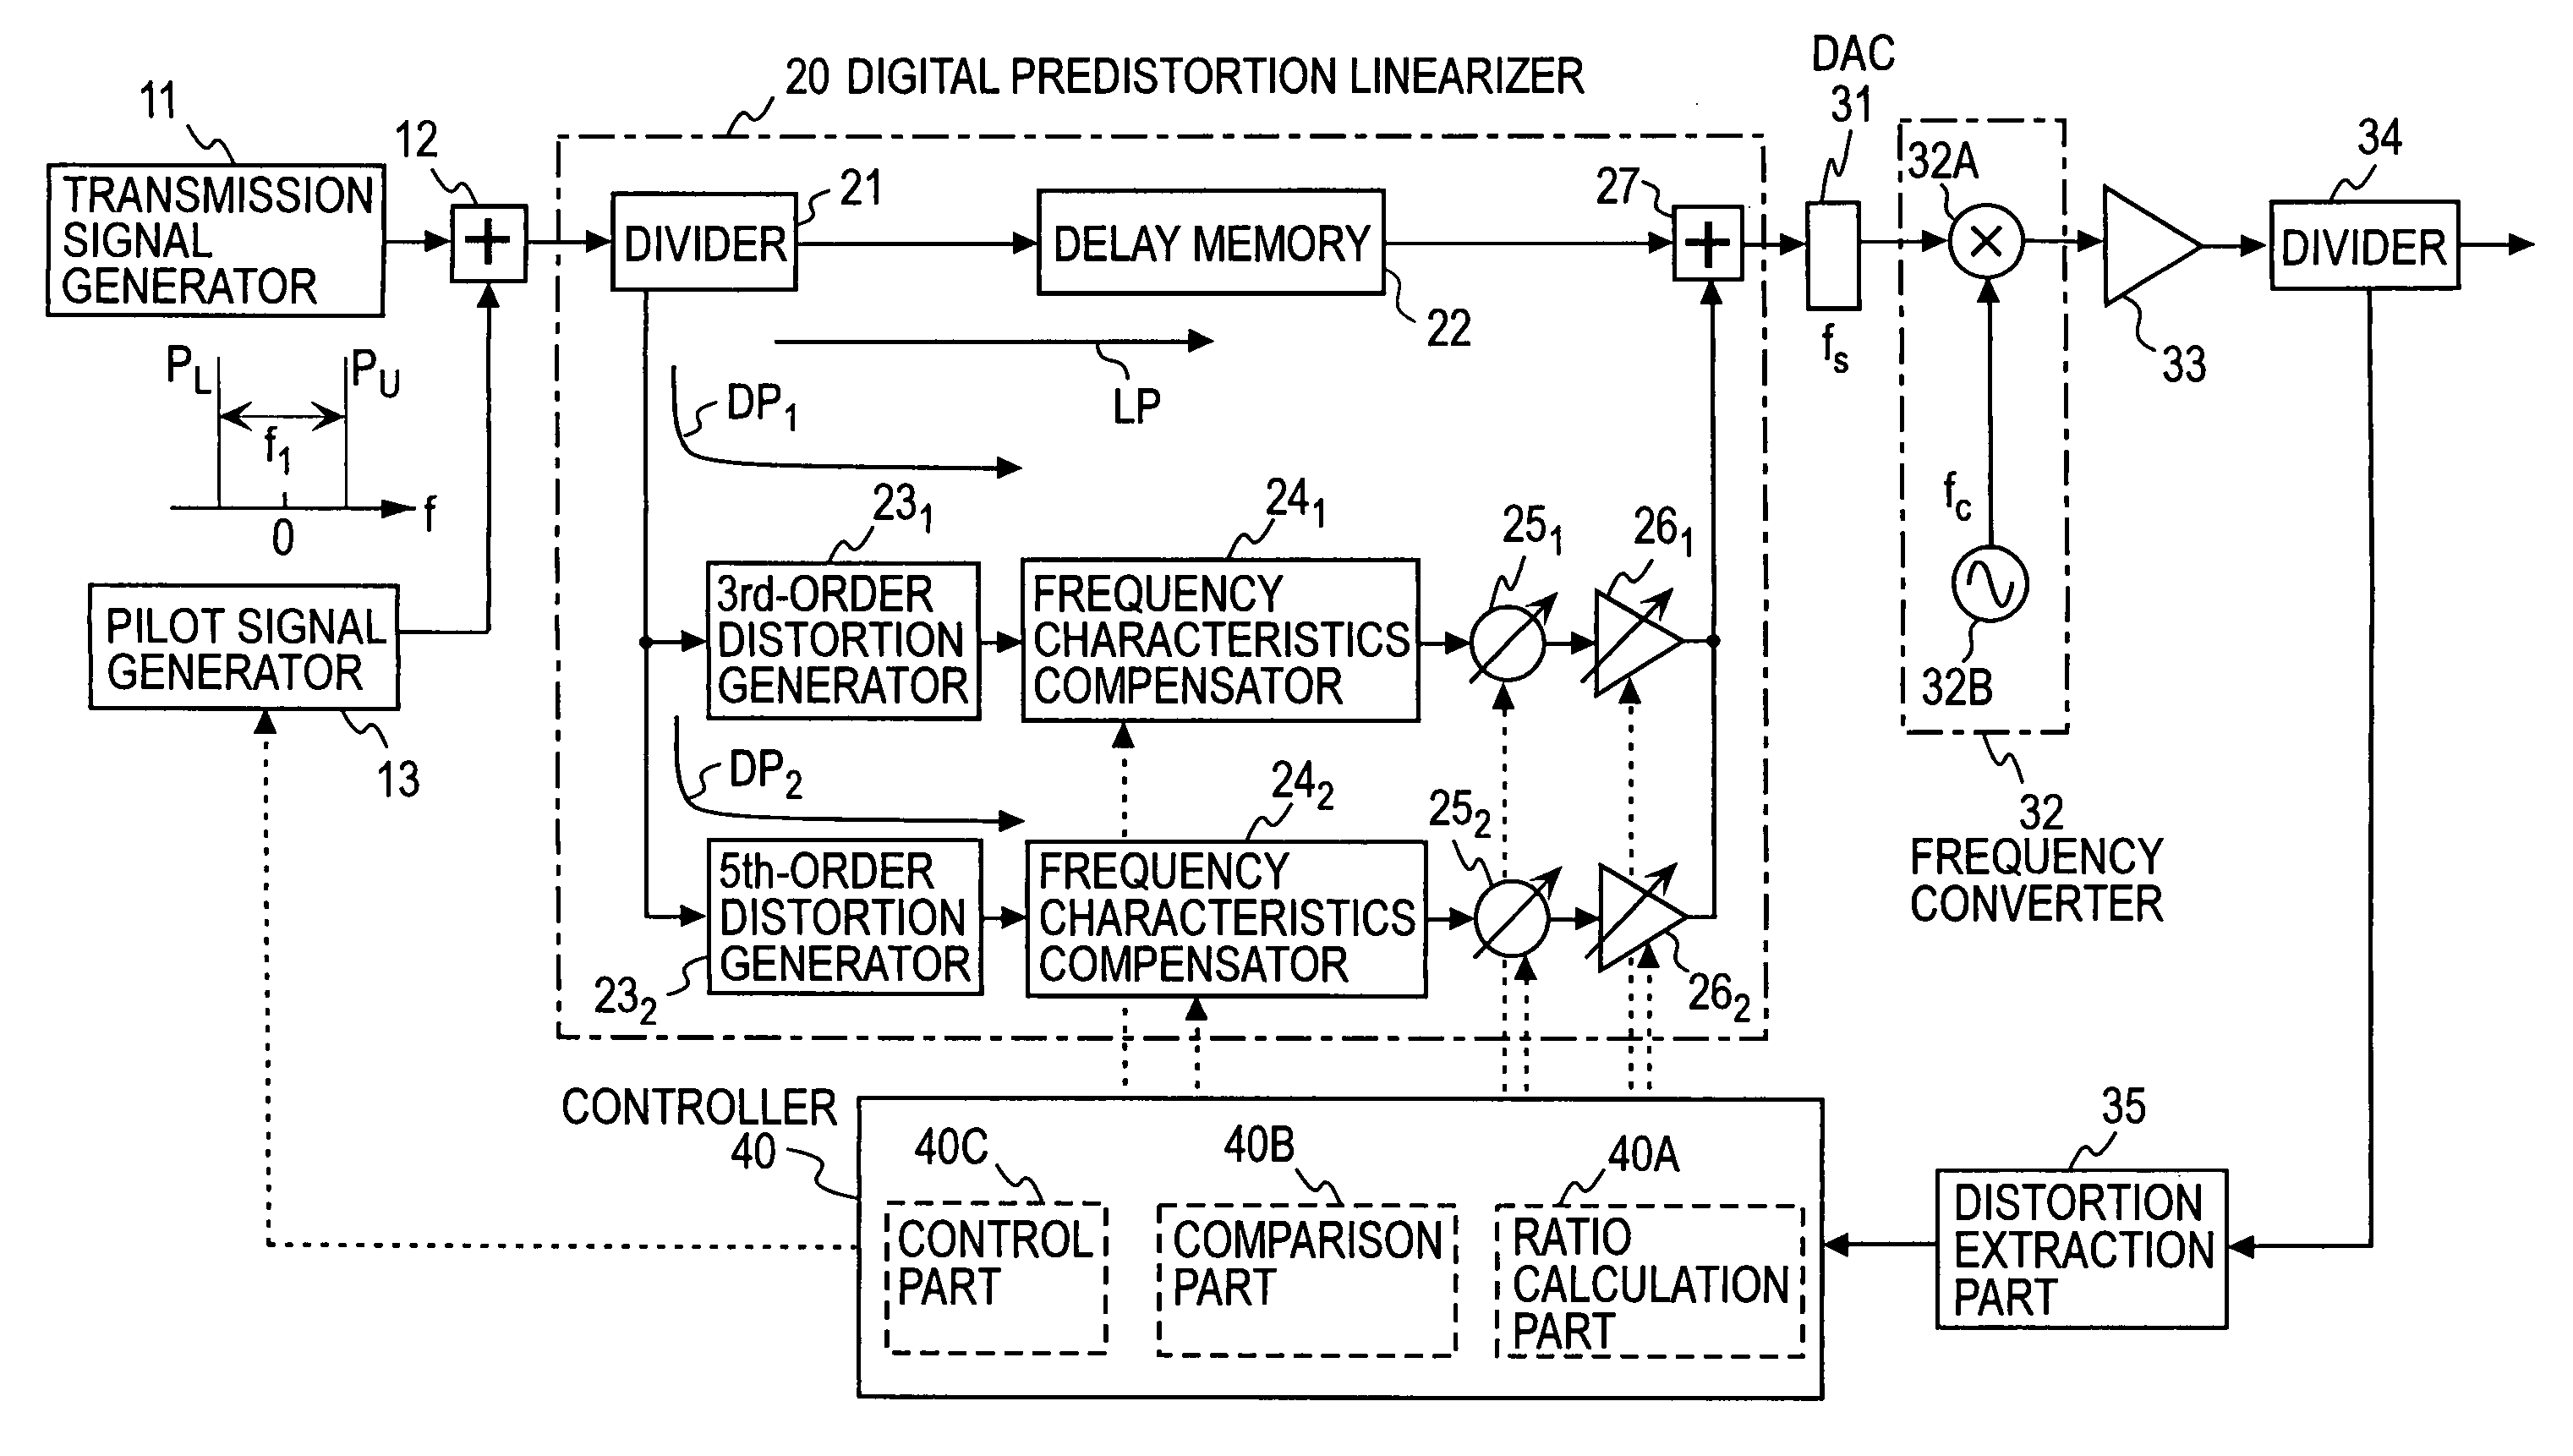 Method and apparatus for control of predistortion linearizer based on power series